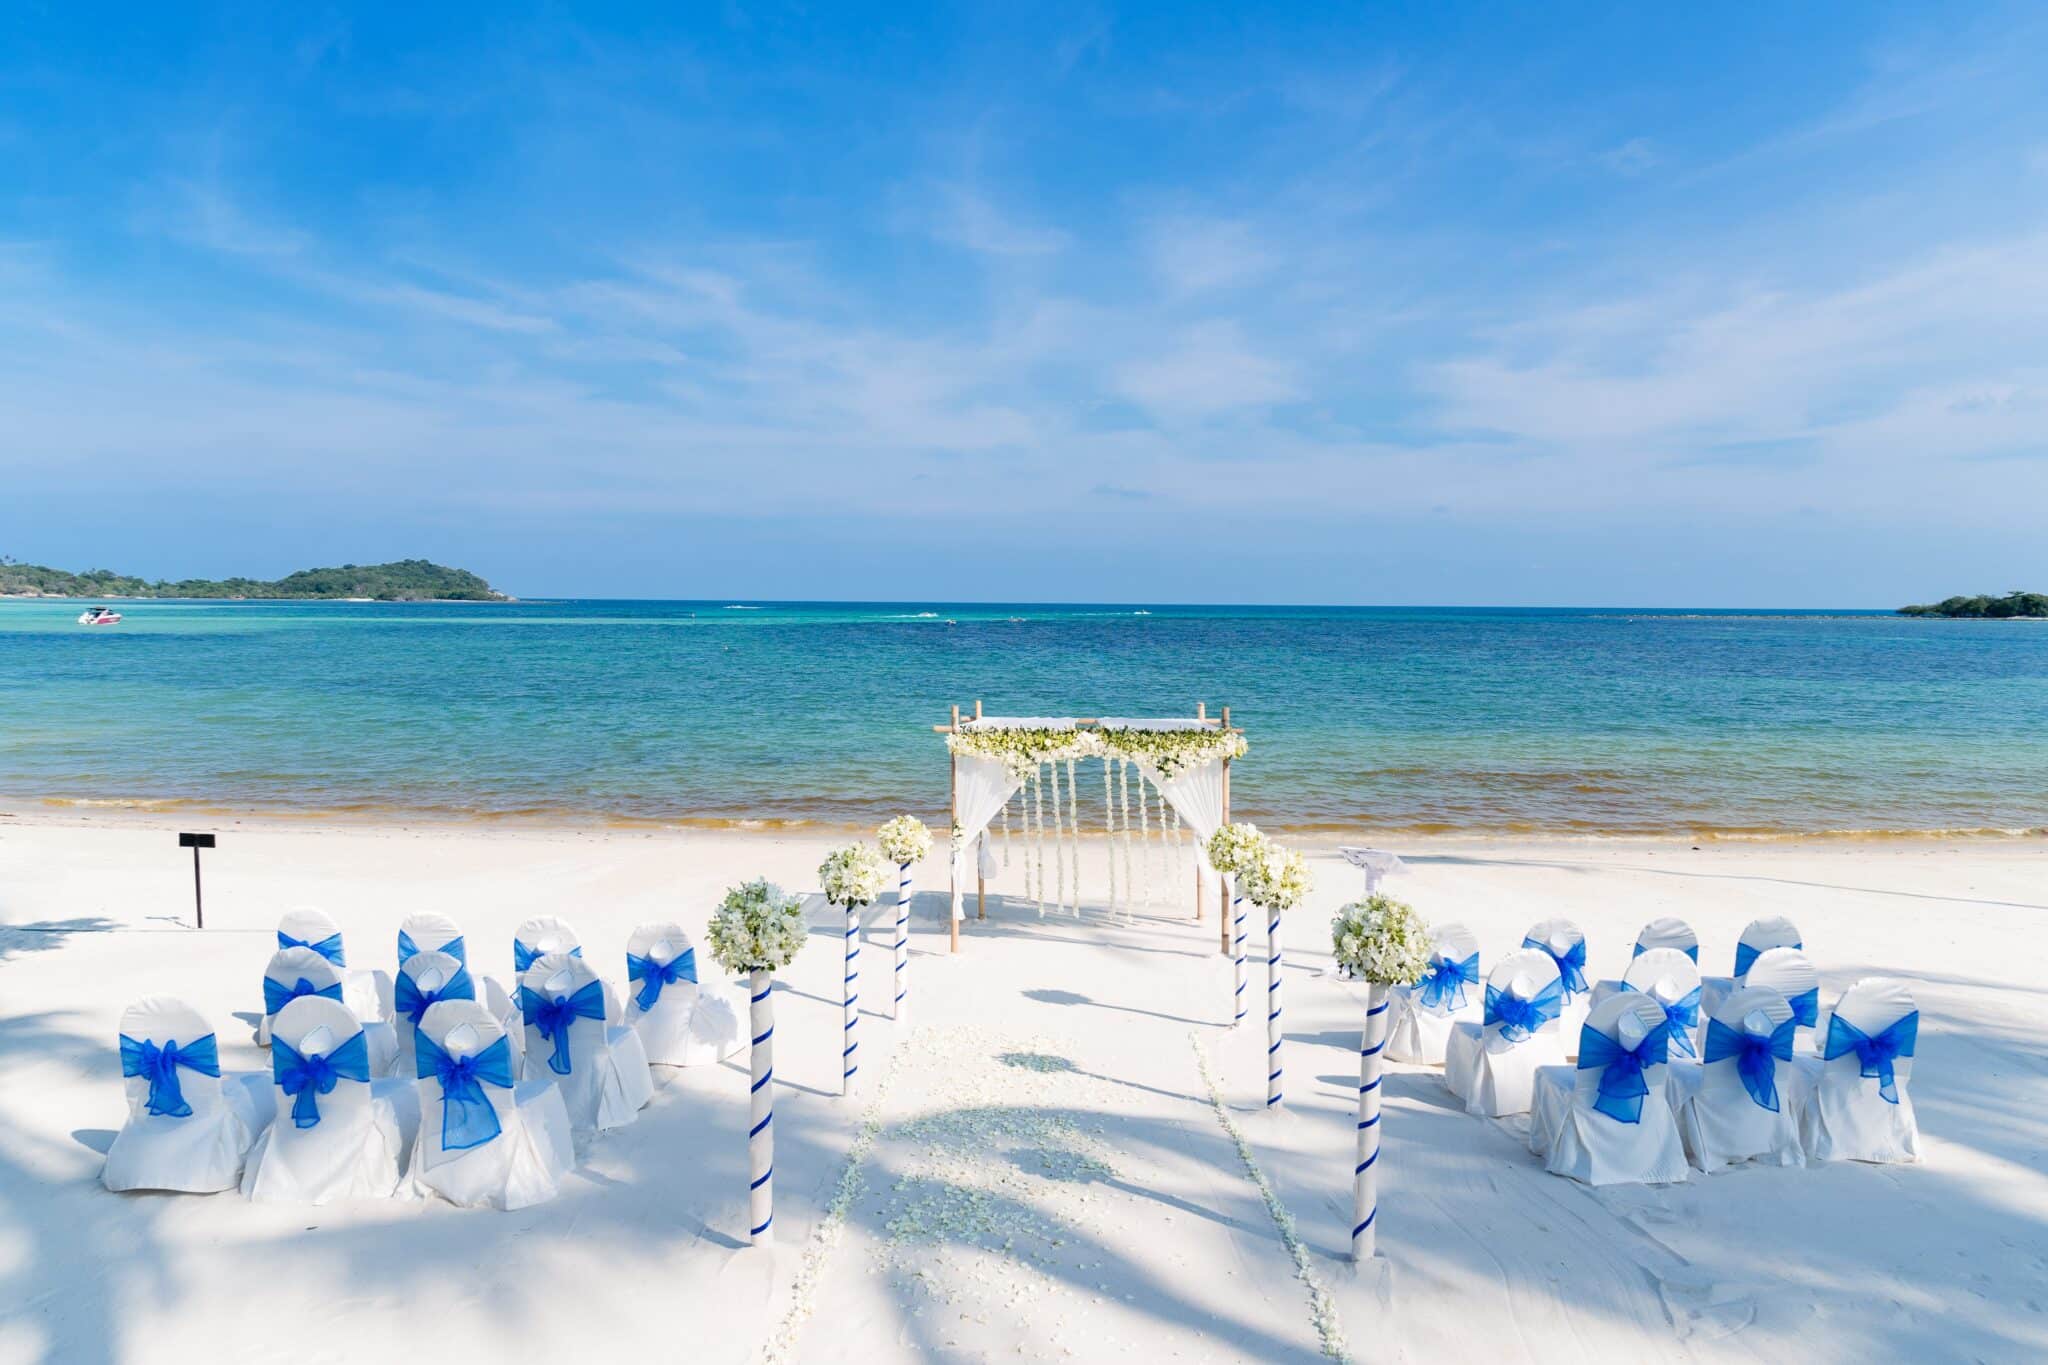 Beautiful beach wedding venue setting with flowers decoration, panoramic ocean view